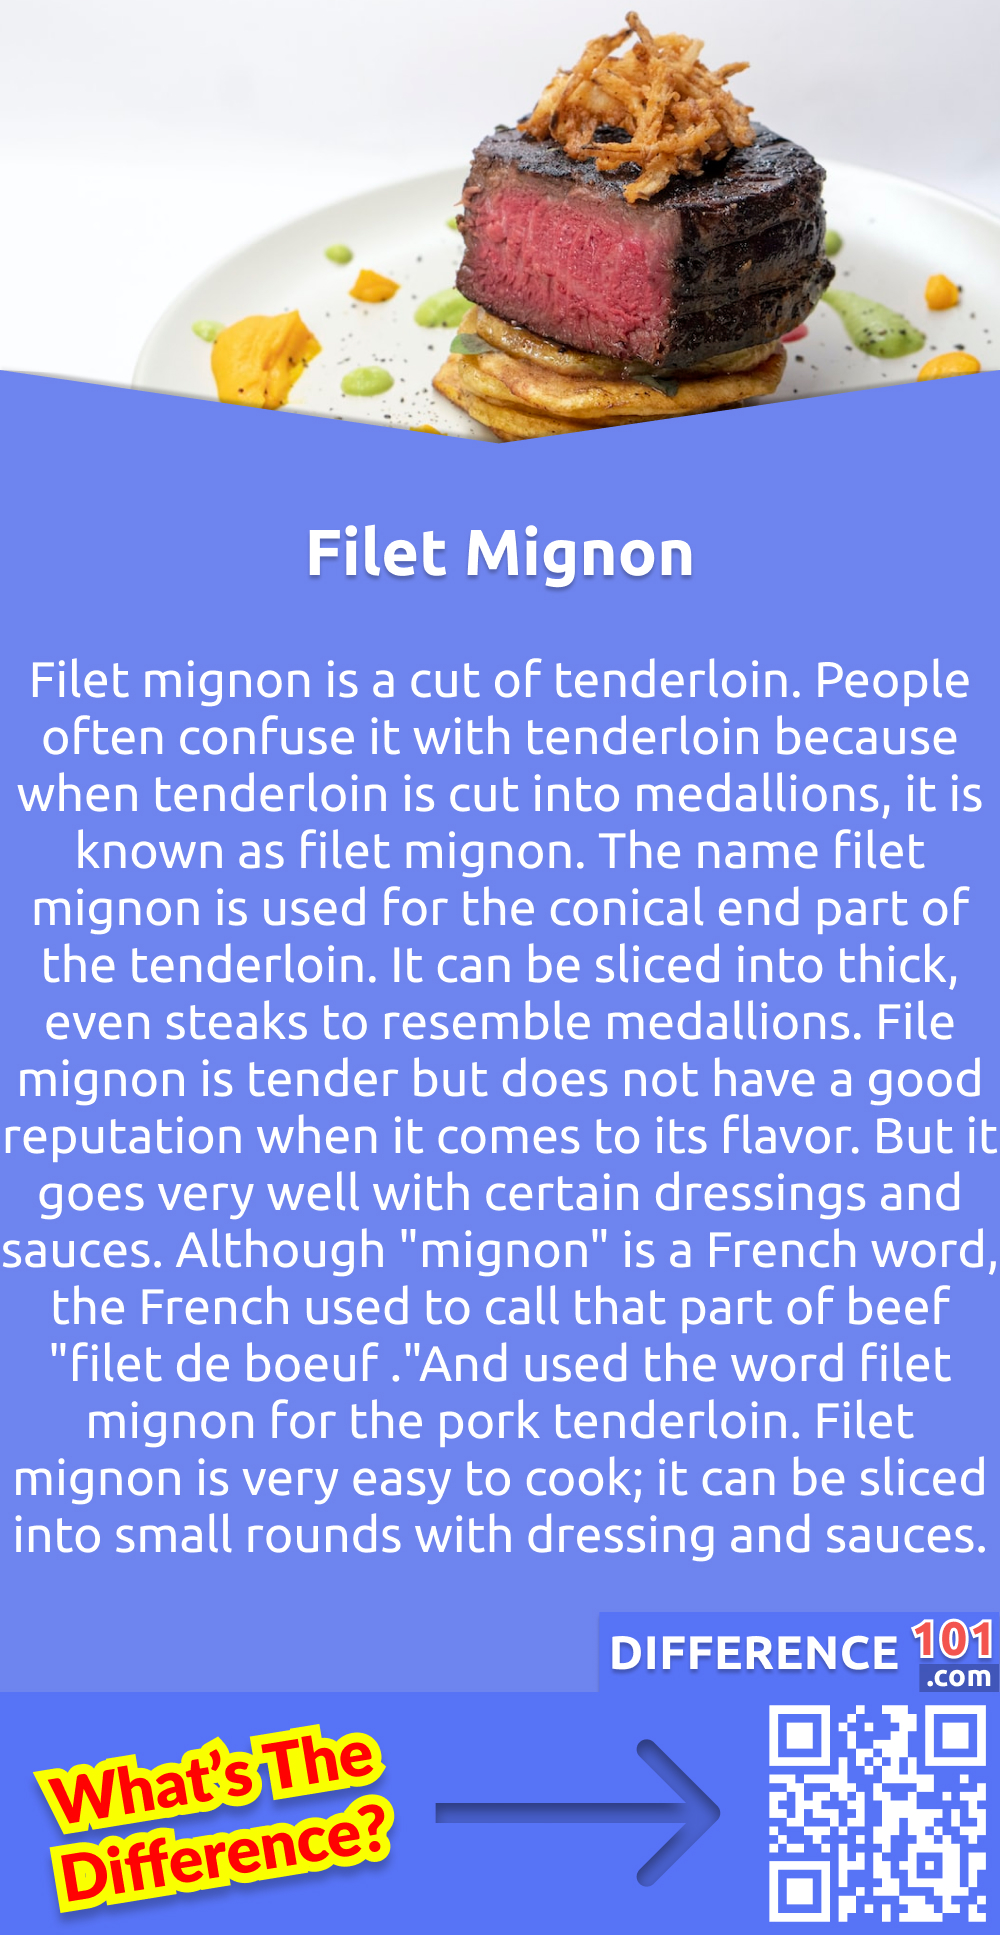 What Is Filet Mignon? Filet mignon is a cut of tenderloin. People often confuse it with tenderloin because when tenderloin is cut into medallions, it is known as filet mignon. The name filet mignon is used for the conical end part of the tenderloin. It can be sliced into thick, even steaks to resemble medallions. File mignon is tender but does not have a good reputation when it comes to its flavor. But it goes very well with certain dressings and sauces. Although "mignon" is a French word, the French used to call that part of beef "filet de boeuf ."And used the word filet mignon for the pork tenderloin. Filet mignon is not a favorite of chefs because of its boring and fewer flavors. But it is a popular menu choice and very expensive as well. Filet mignon is very easy to cook; it can be sliced into small rounds with dressing and sauces.